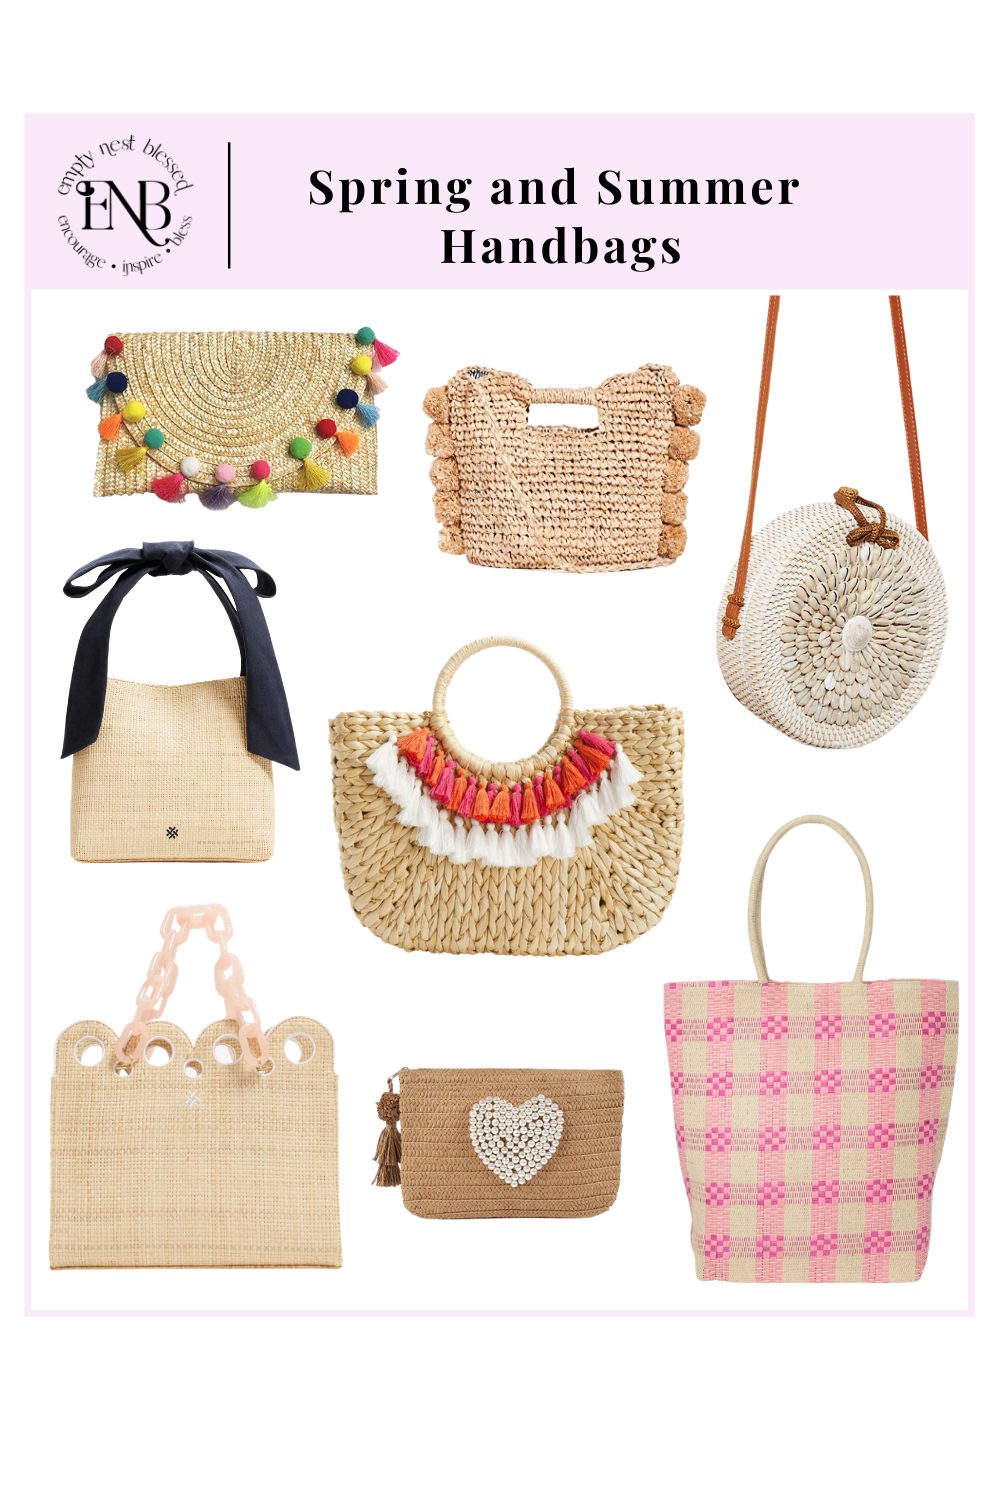 2021 Summer Handbag Styles | Five Hot Trends to Tote